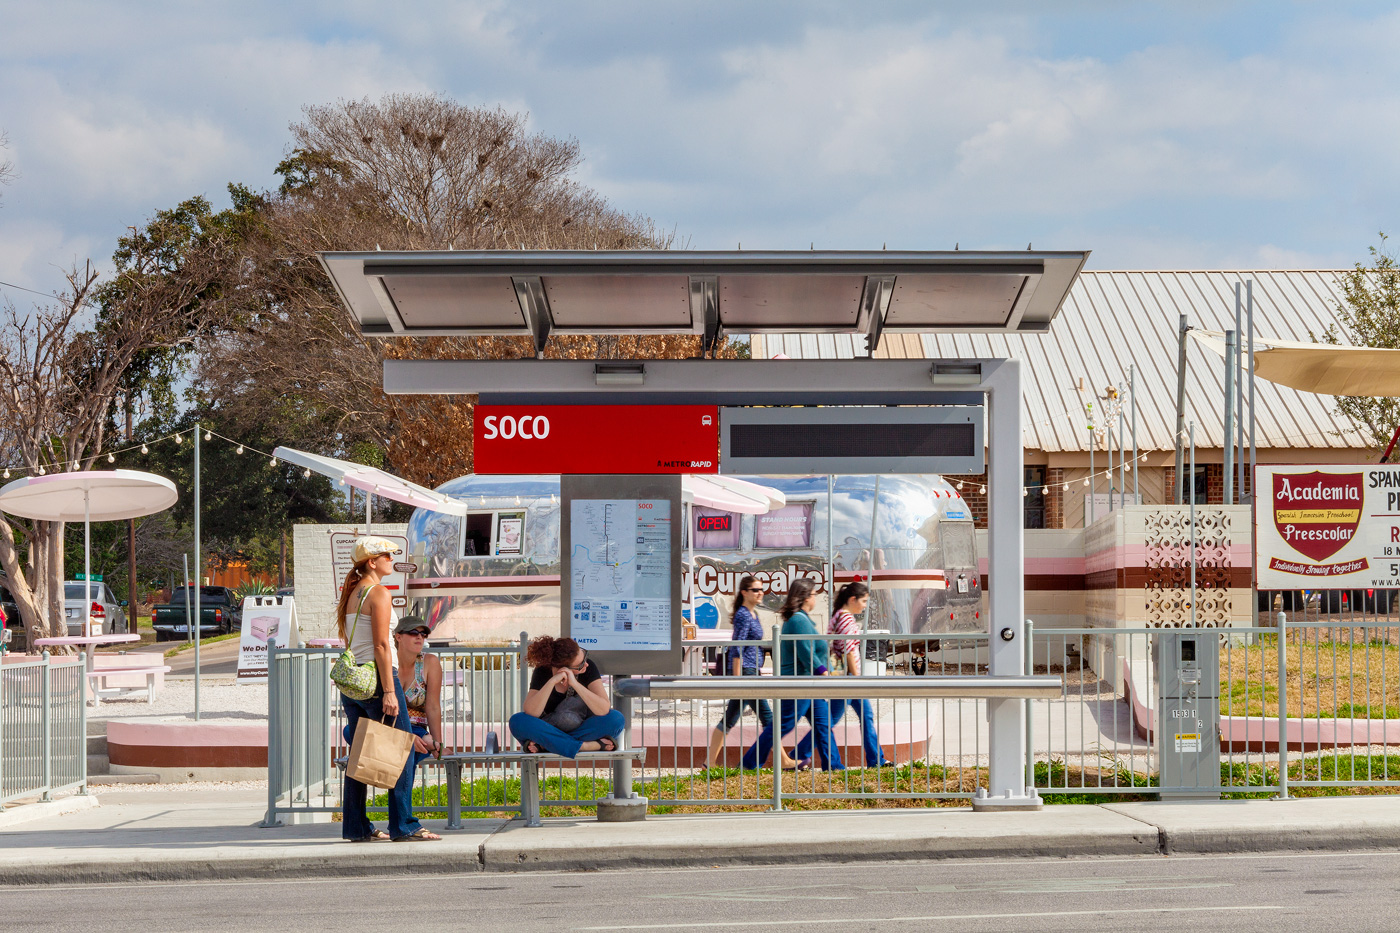 People waiting for bus at a modern bus stop on South Congress.